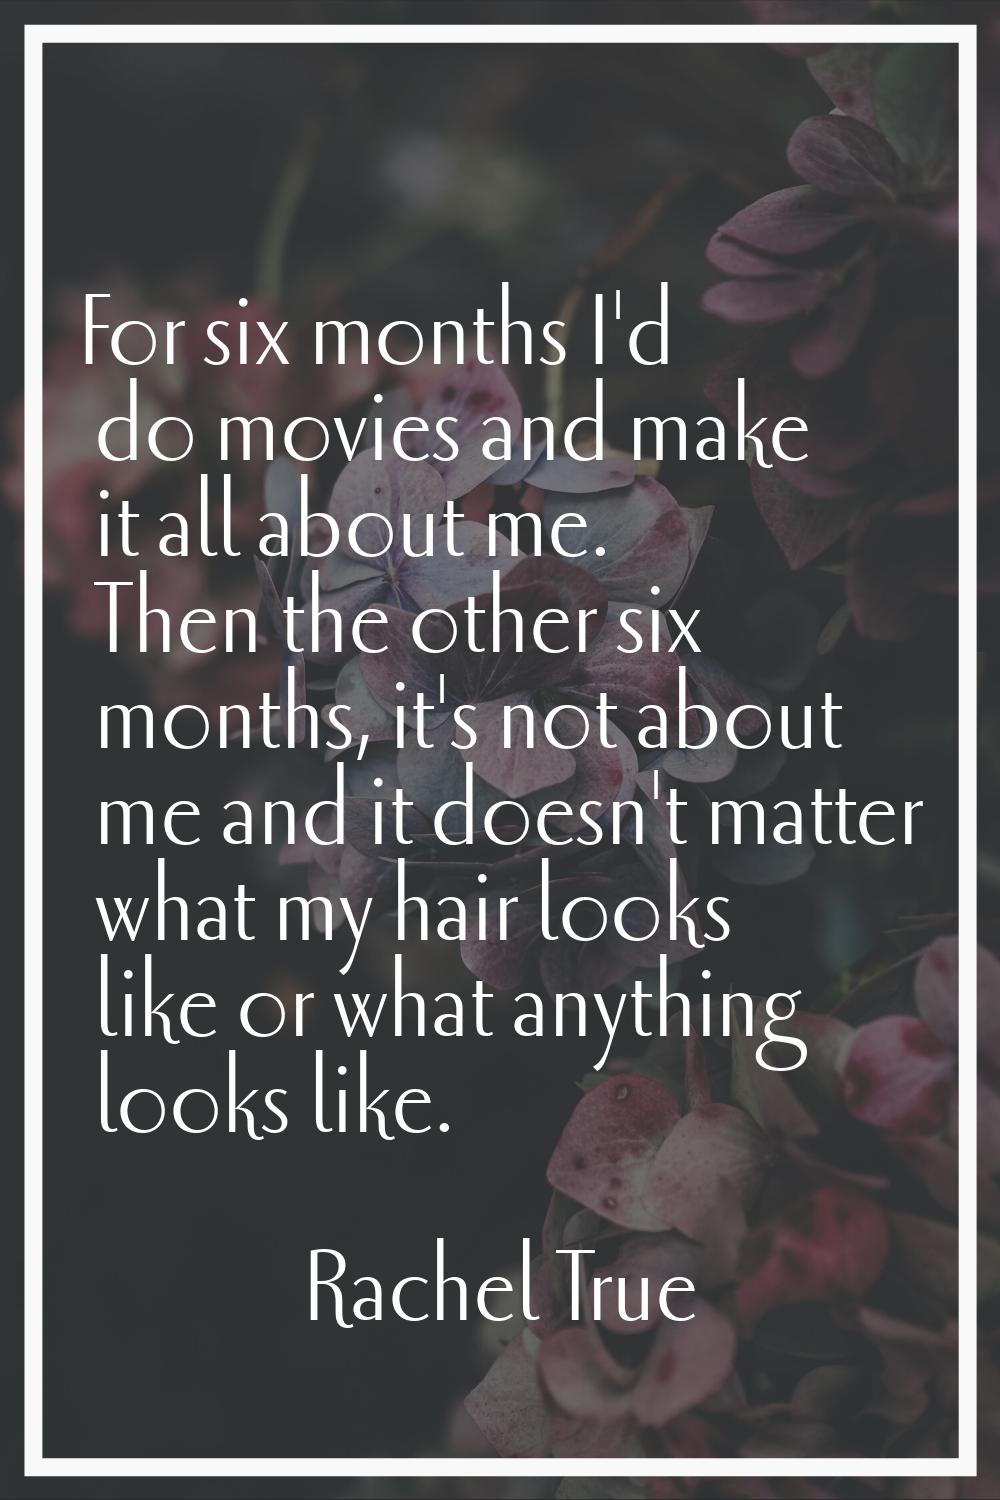 For six months I'd do movies and make it all about me. Then the other six months, it's not about me